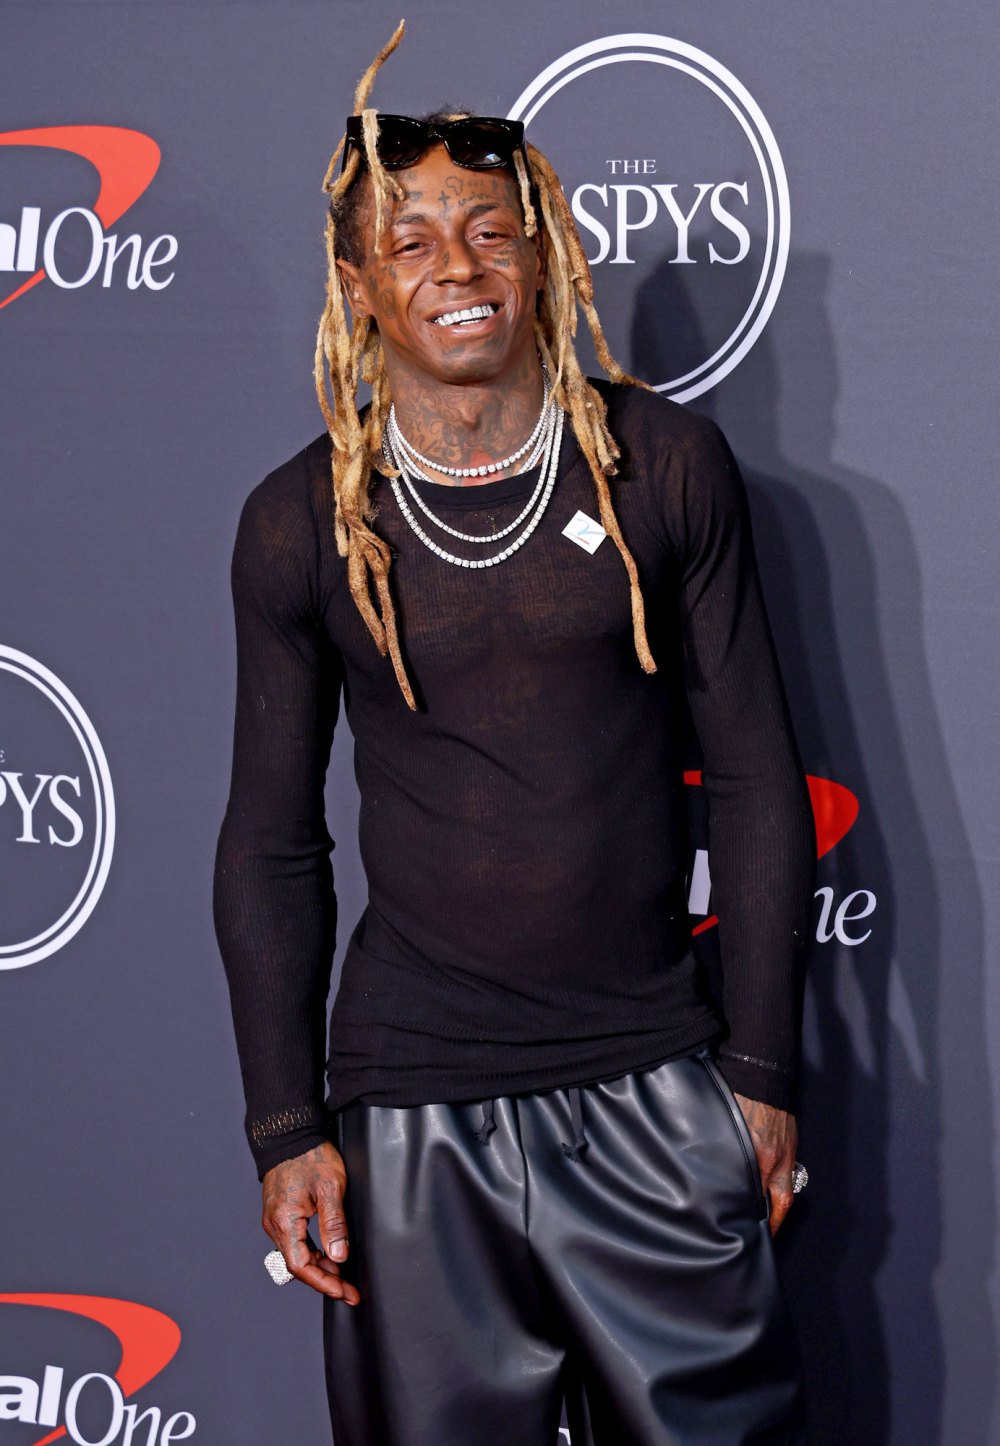 Lil Wayne Becomes The Latest Celeb Unhappy With His Wax Figure